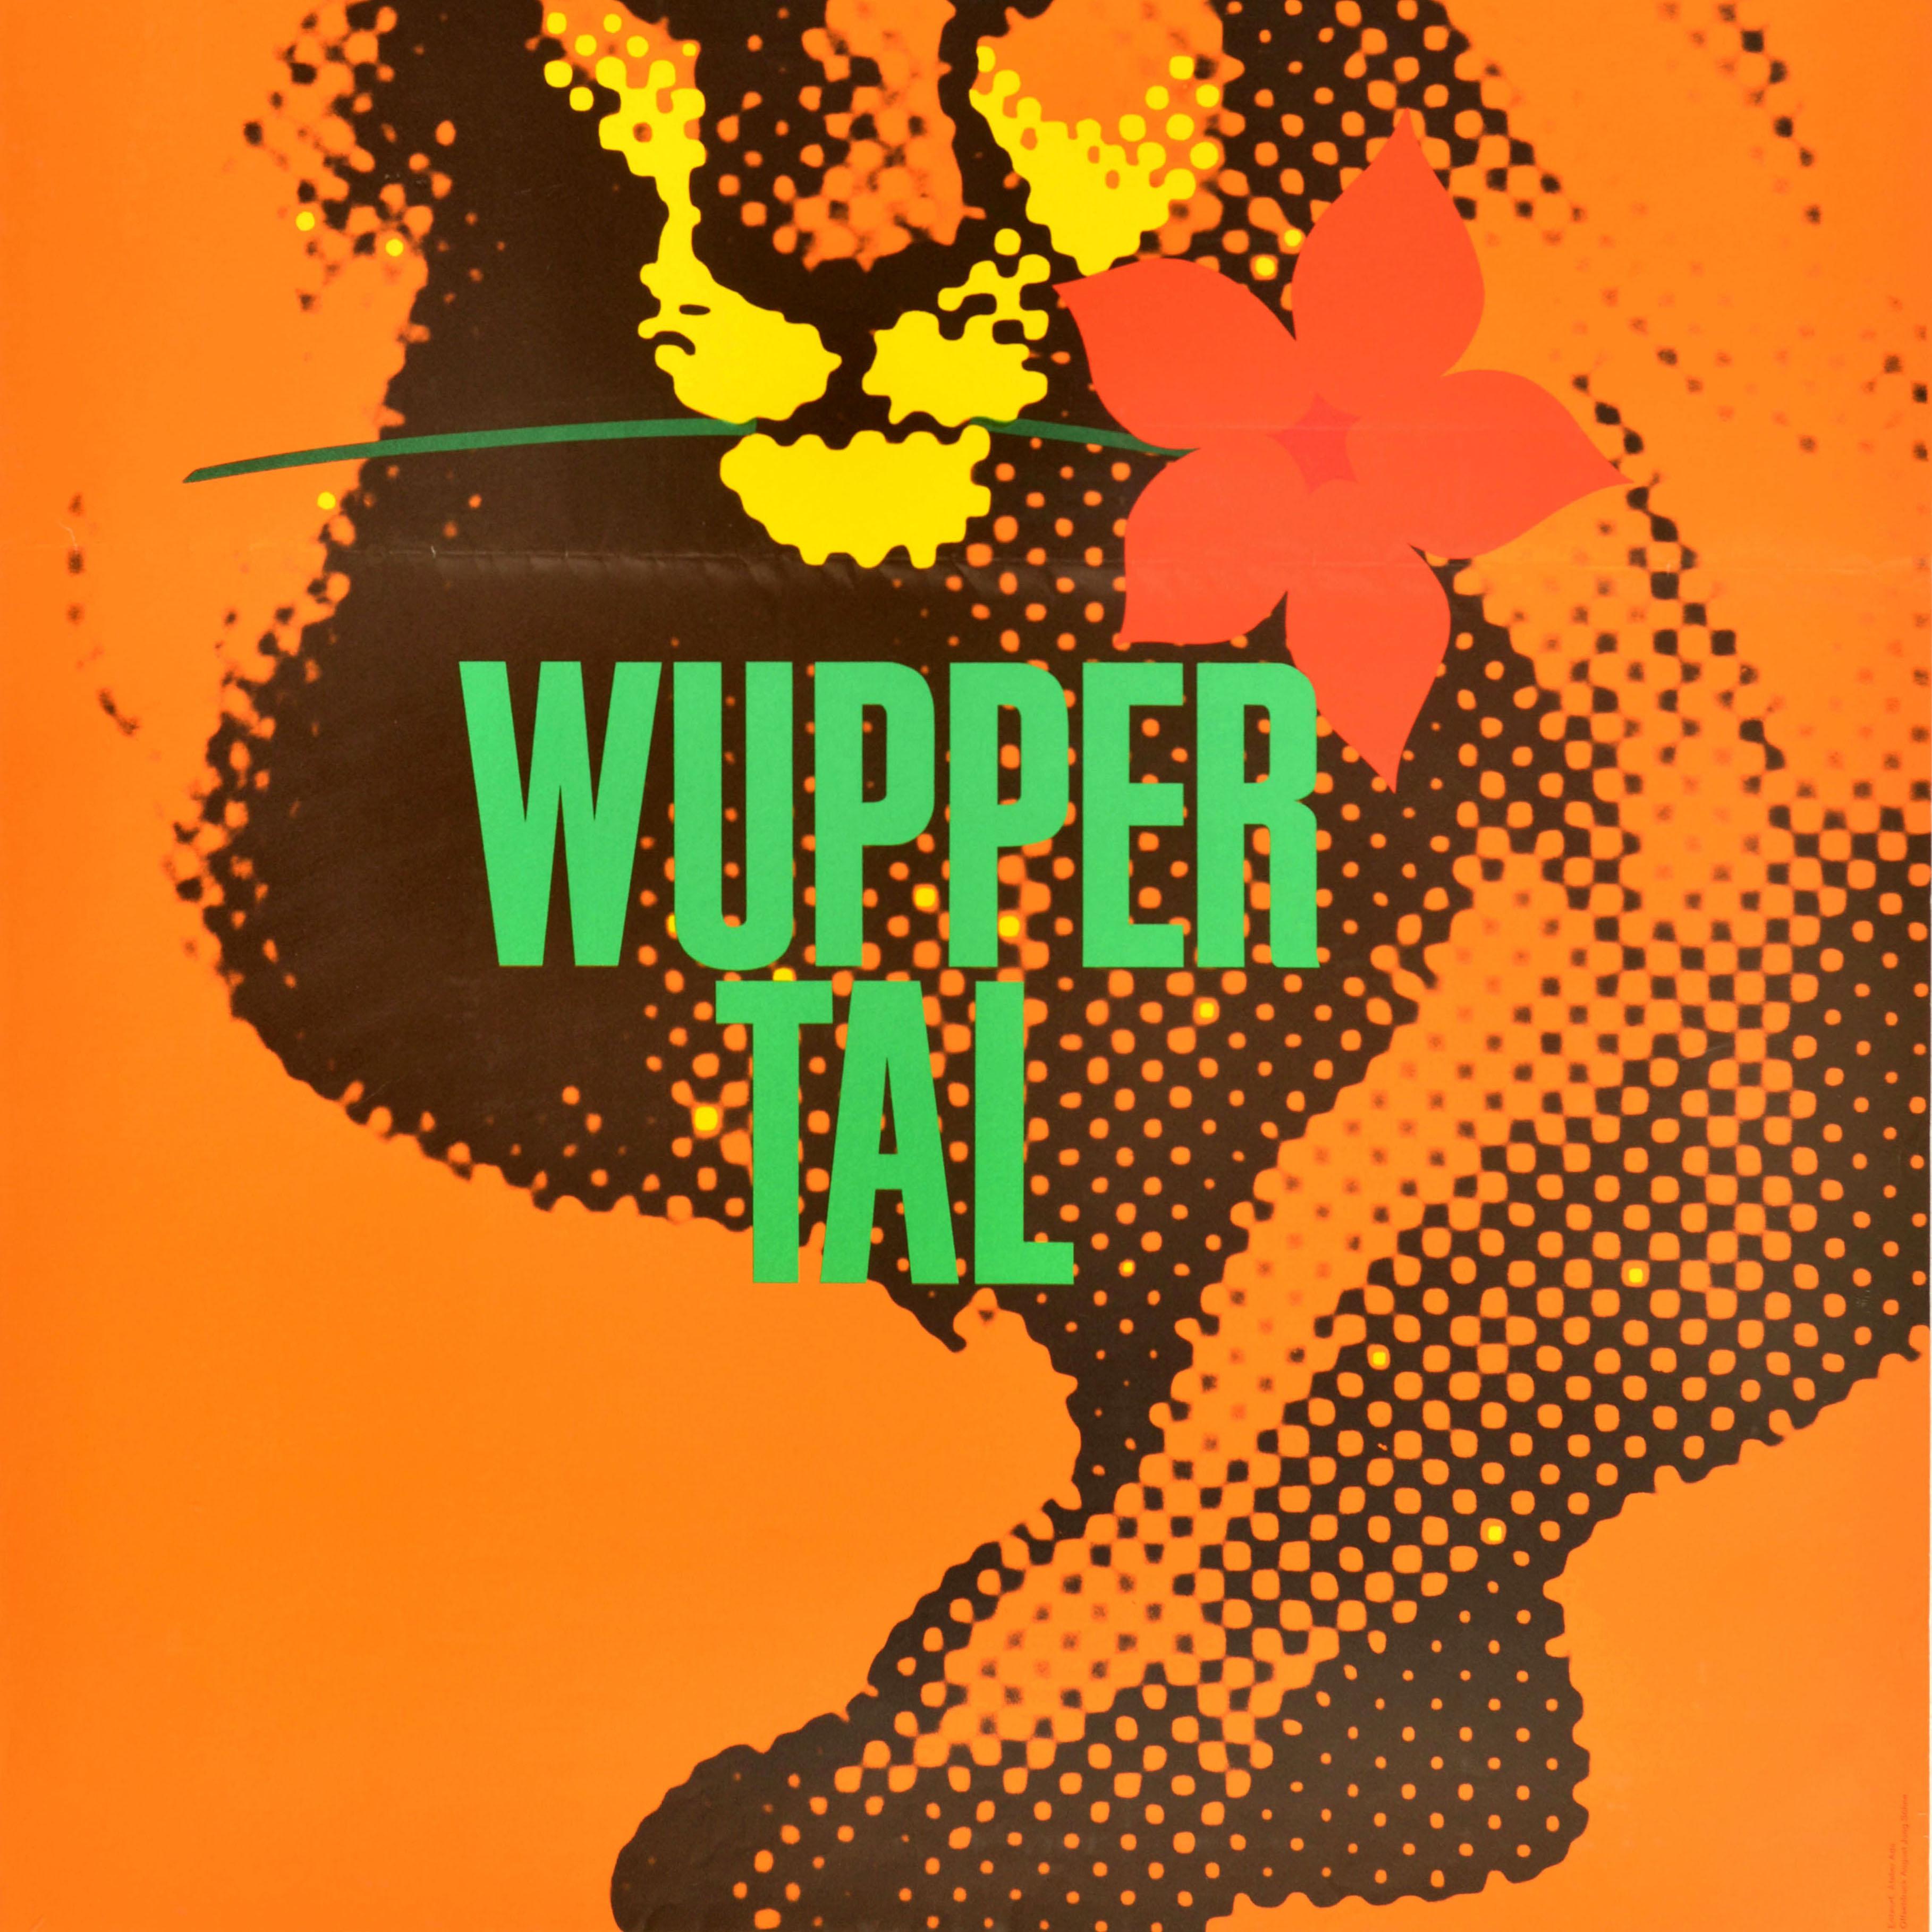 Original vintage advertising poster for Wuppertal Zoo featuring a colourful design depicting a lion holding a flower in its mouth against an orange background with the title text in decorative bold lettering above and below. Founded in 1879 as the